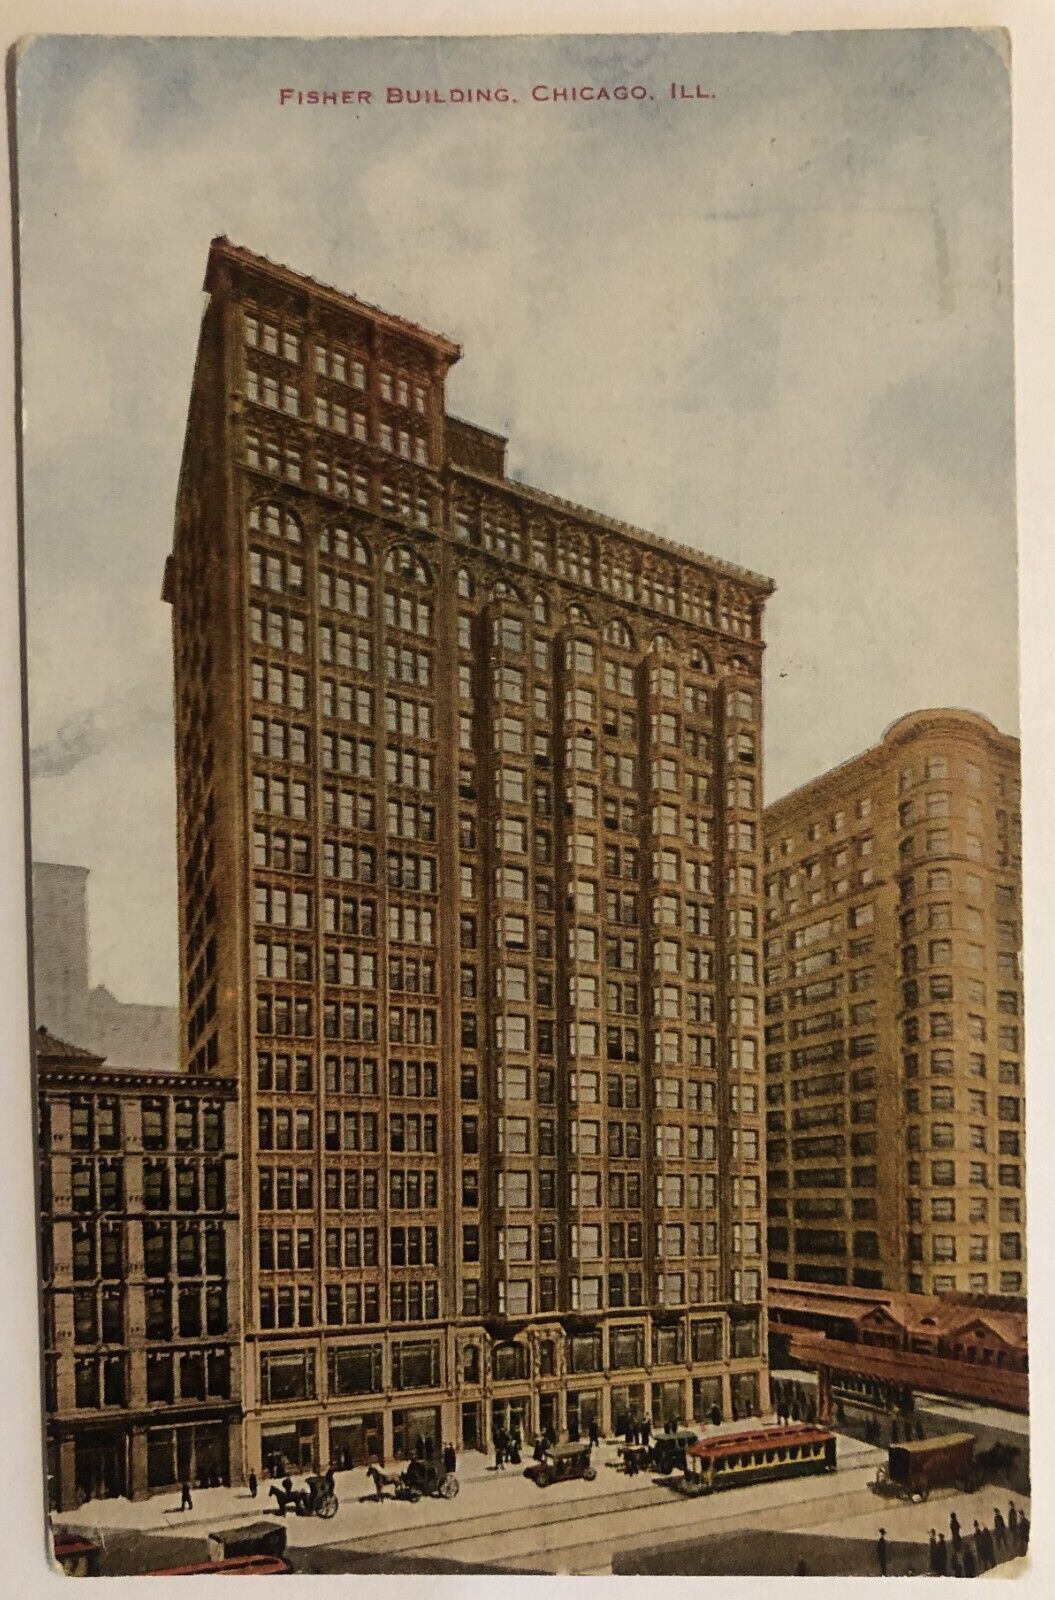 Fisher Building, Chicago, ILL. Antique Postcard, p 1911, Horse buggy, Cars